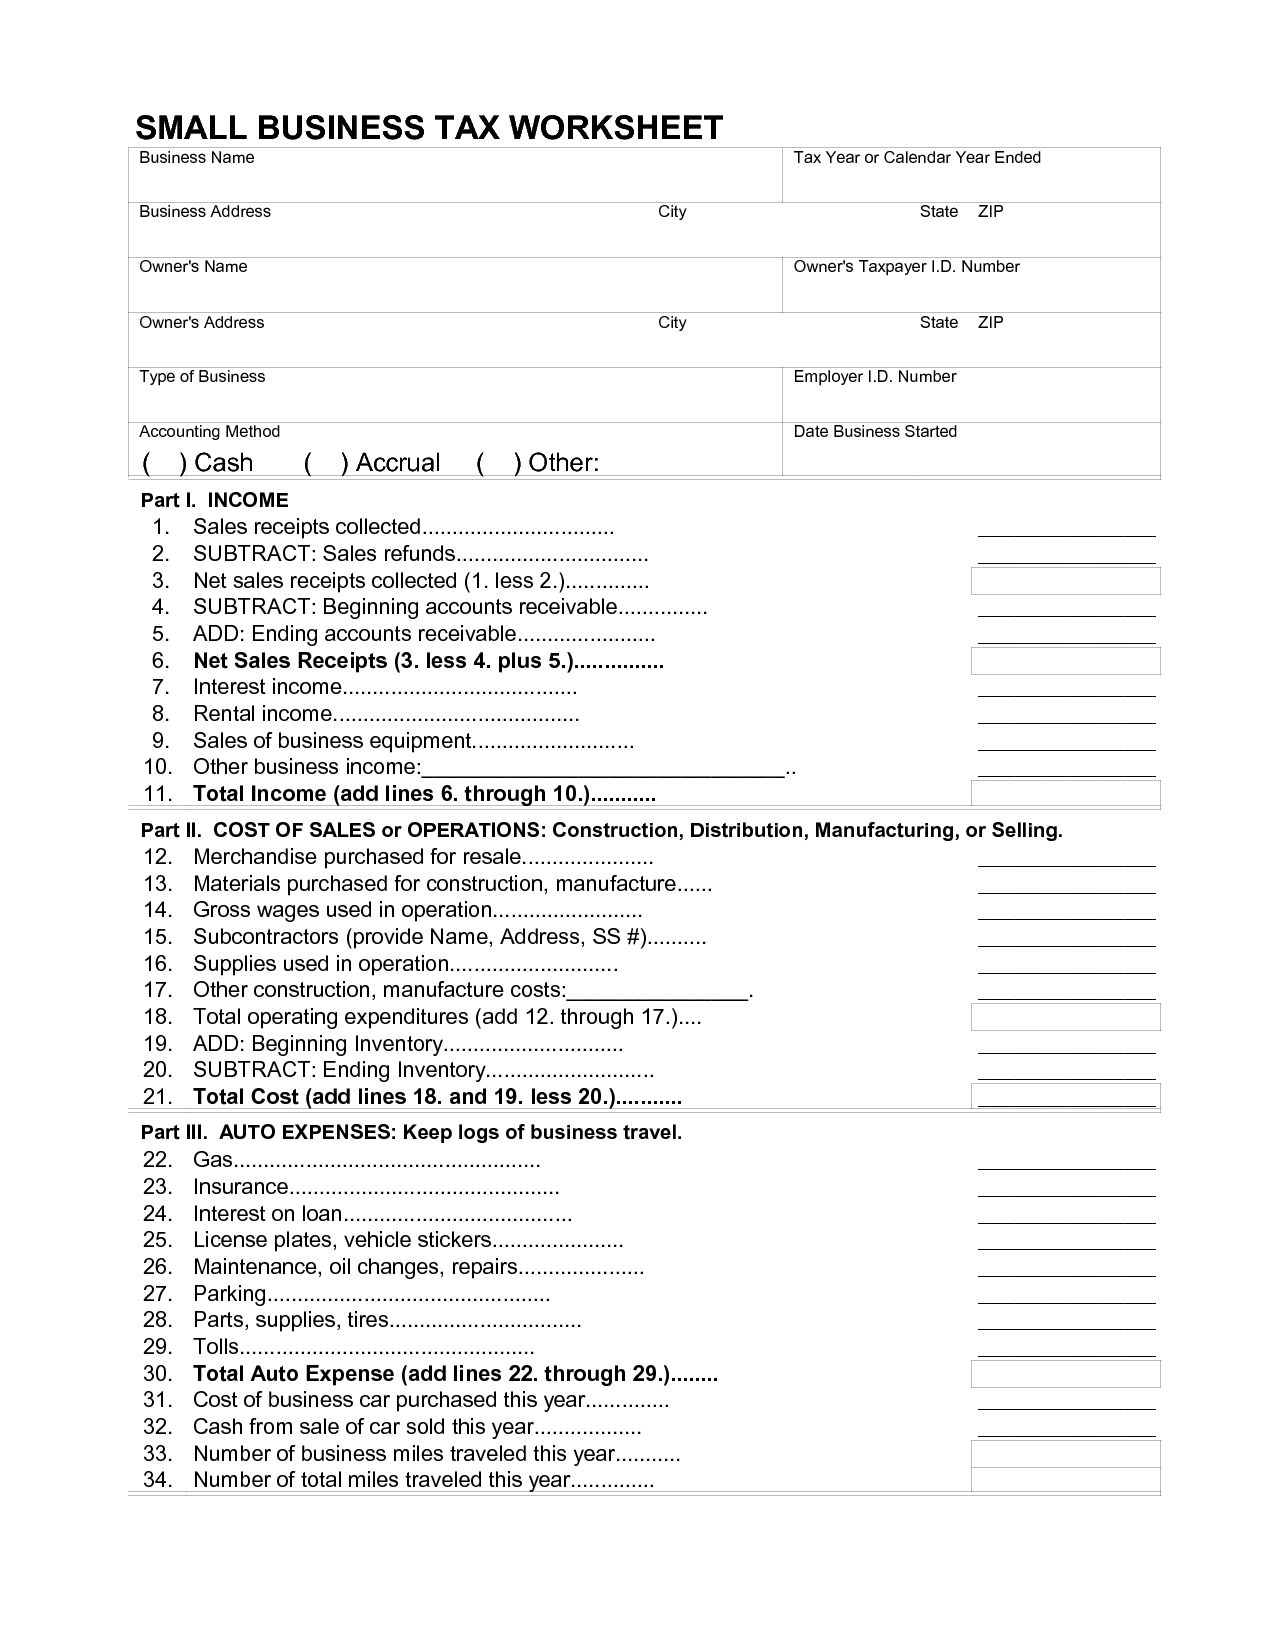 8 Best Images of Tax Itemized Deduction Worksheet - IRS Form 1040 Itemized Deductions ...1275 x 1650